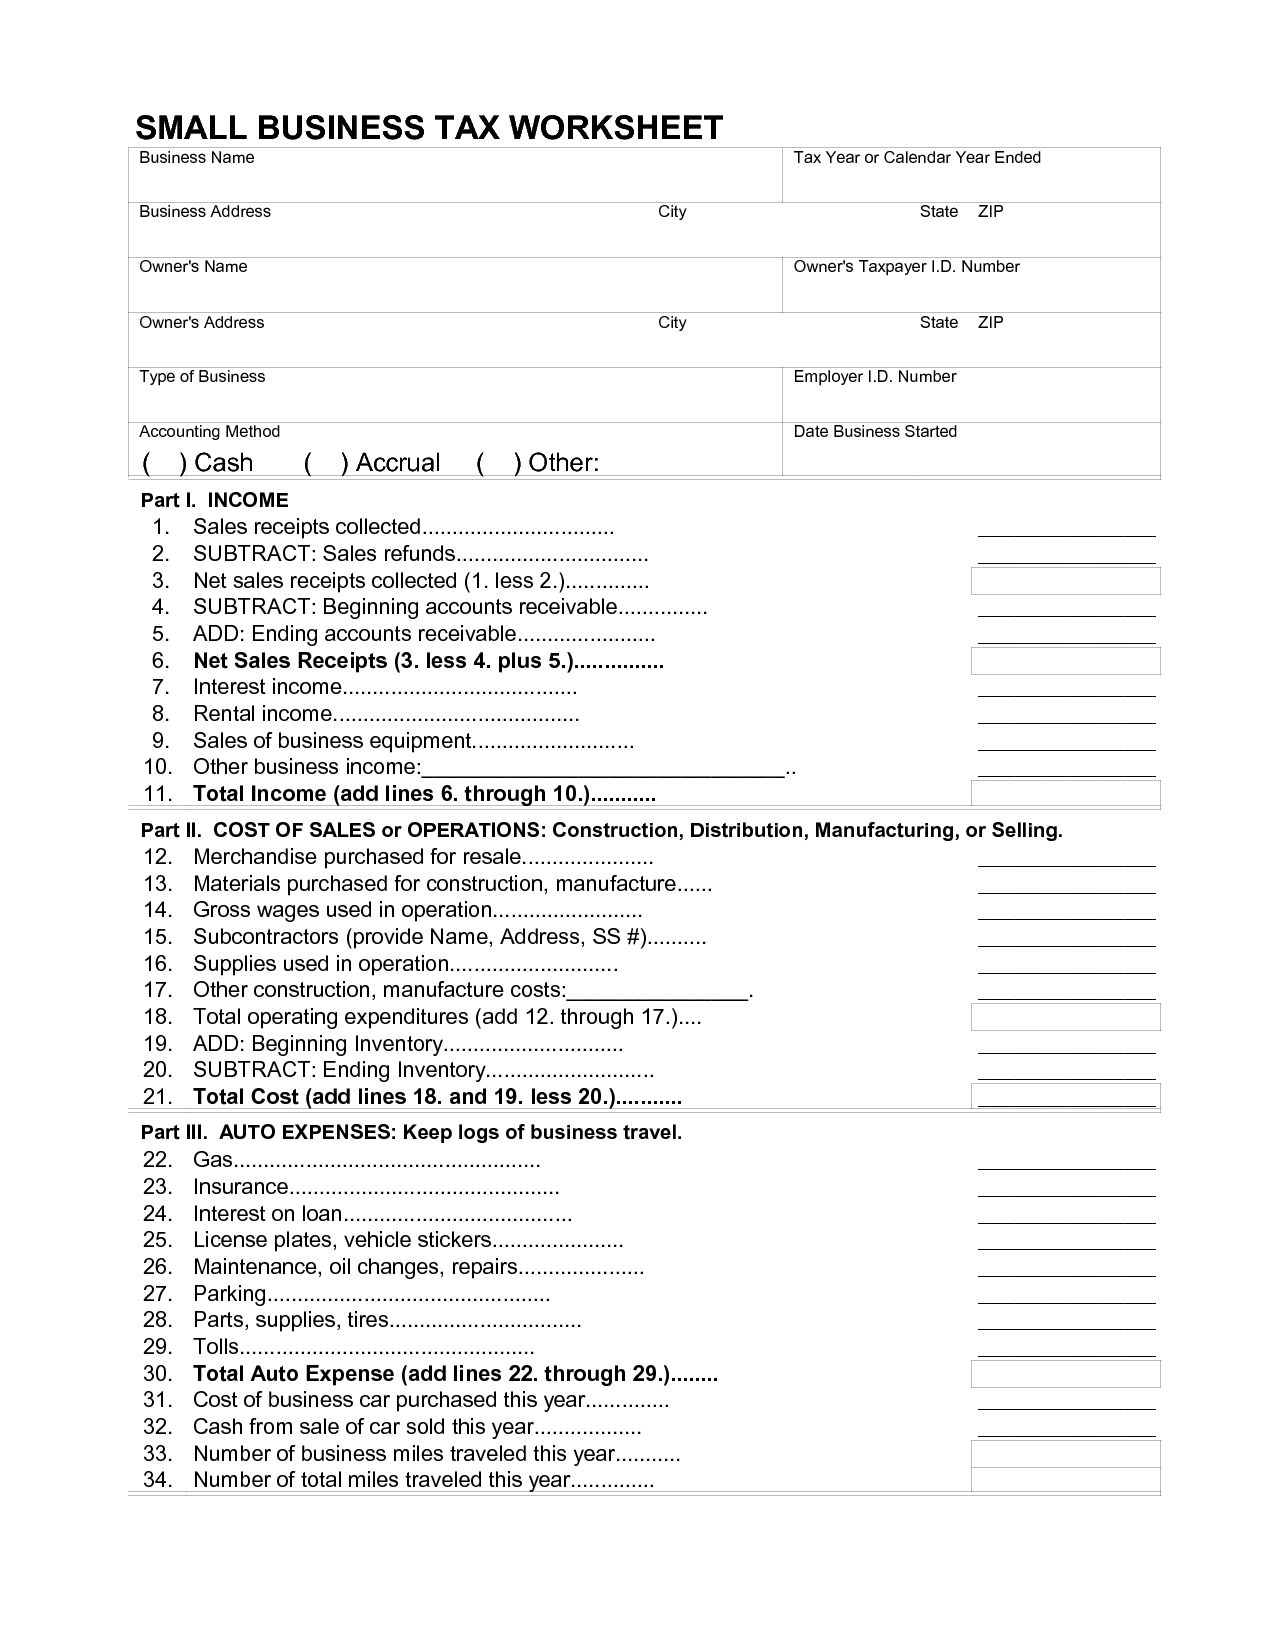 8 Best Images of Tax Itemized Deduction Worksheet - IRS Form 1040 Itemized Deductions ...1275 x 1650